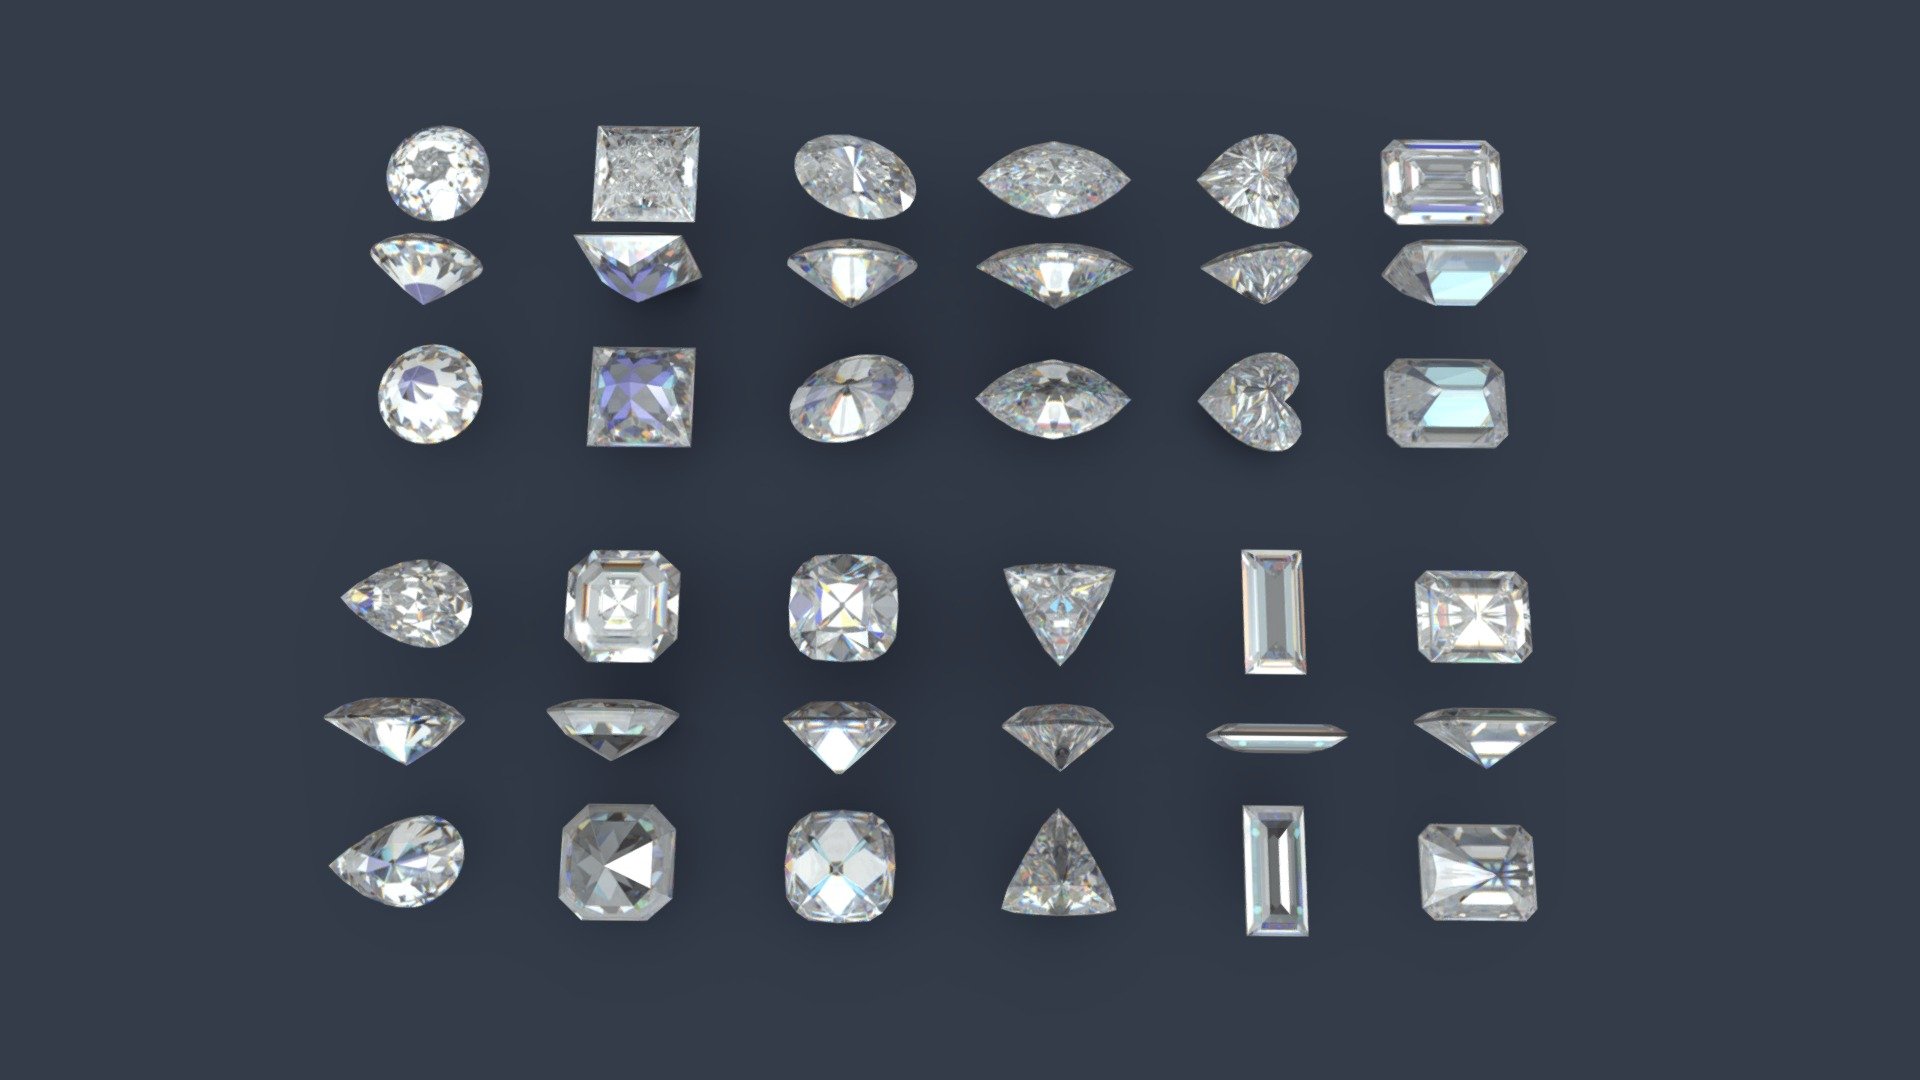 This is a collection of twelve different diamonds cut.
The texture on is a render of those gems with a diamant material.

1 - ROUND DIAMONDS 
2 - PRINCESS CUT DIAMOND
3 - OVAL DIAMONDS
4 - MARQUISE DIAMOND
5 - HEART SHAPED DIAMONDS
6 - EMERALD CUT DIAMONDS
7 - PEAR SHAPED DIAMONDS
8 - ASSCHER CUT DIAMONDS
9 - CUSHION CUT DIAMOND
10 - TRILLION CUT DIAMONDS
11 - BAGUETTE CUT DIAMONDS
12 - RADIANT CUT DIAMONDS - Diamonds cuts Collection 3d model